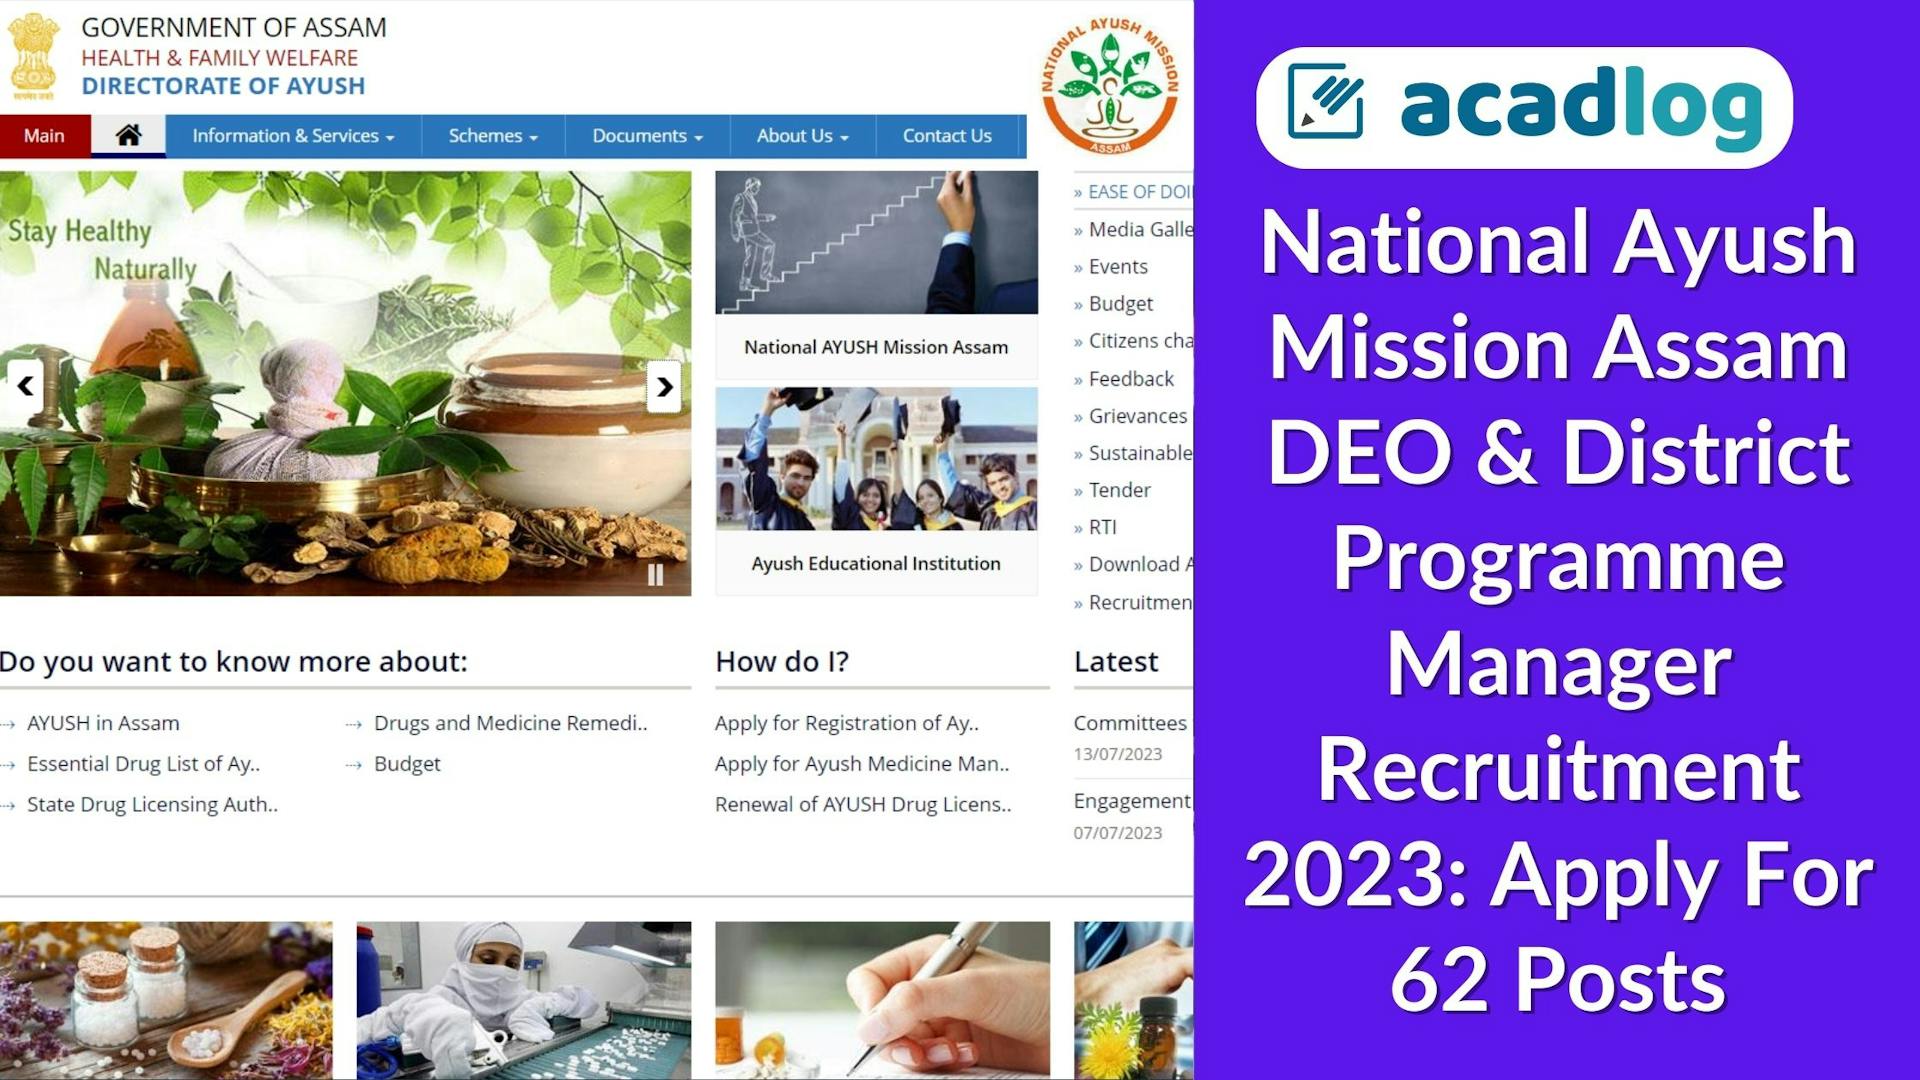 National Ayush Mission Assam DEO & District Programme Manager Recruitment 2023: Apply For 62 Posts